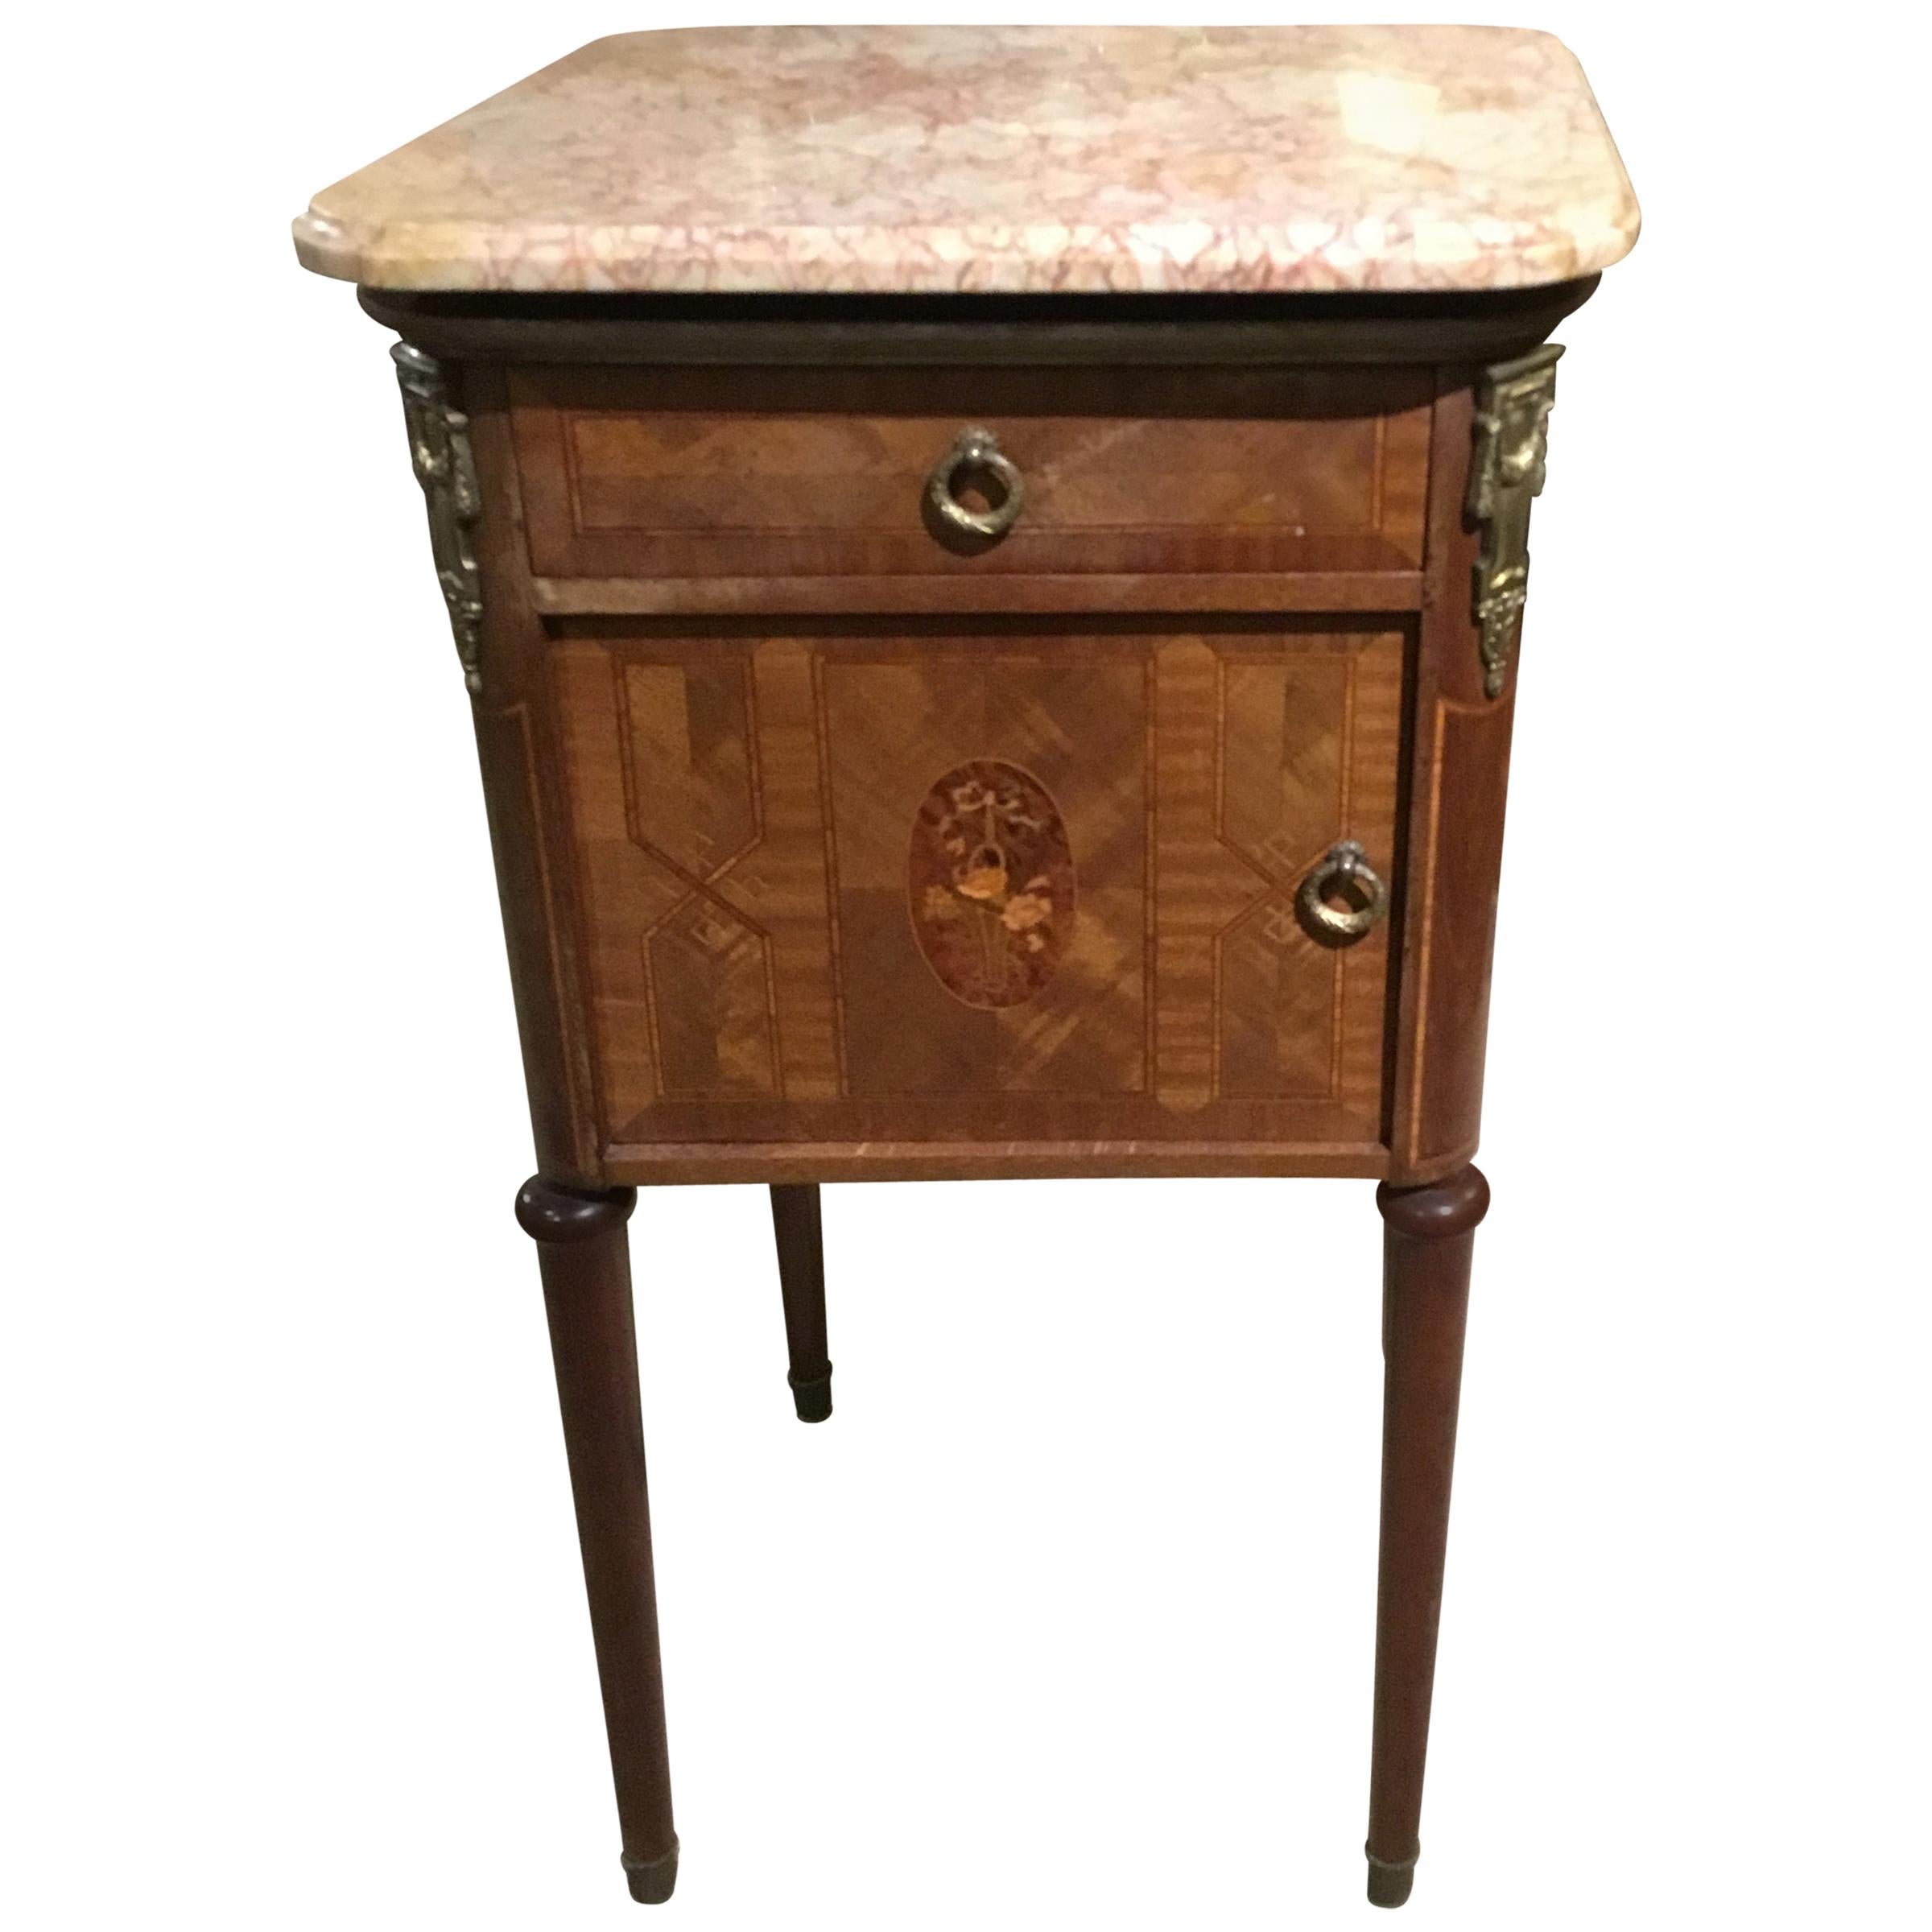 French Bedside Table with Marble Top and Marquetry Inlay